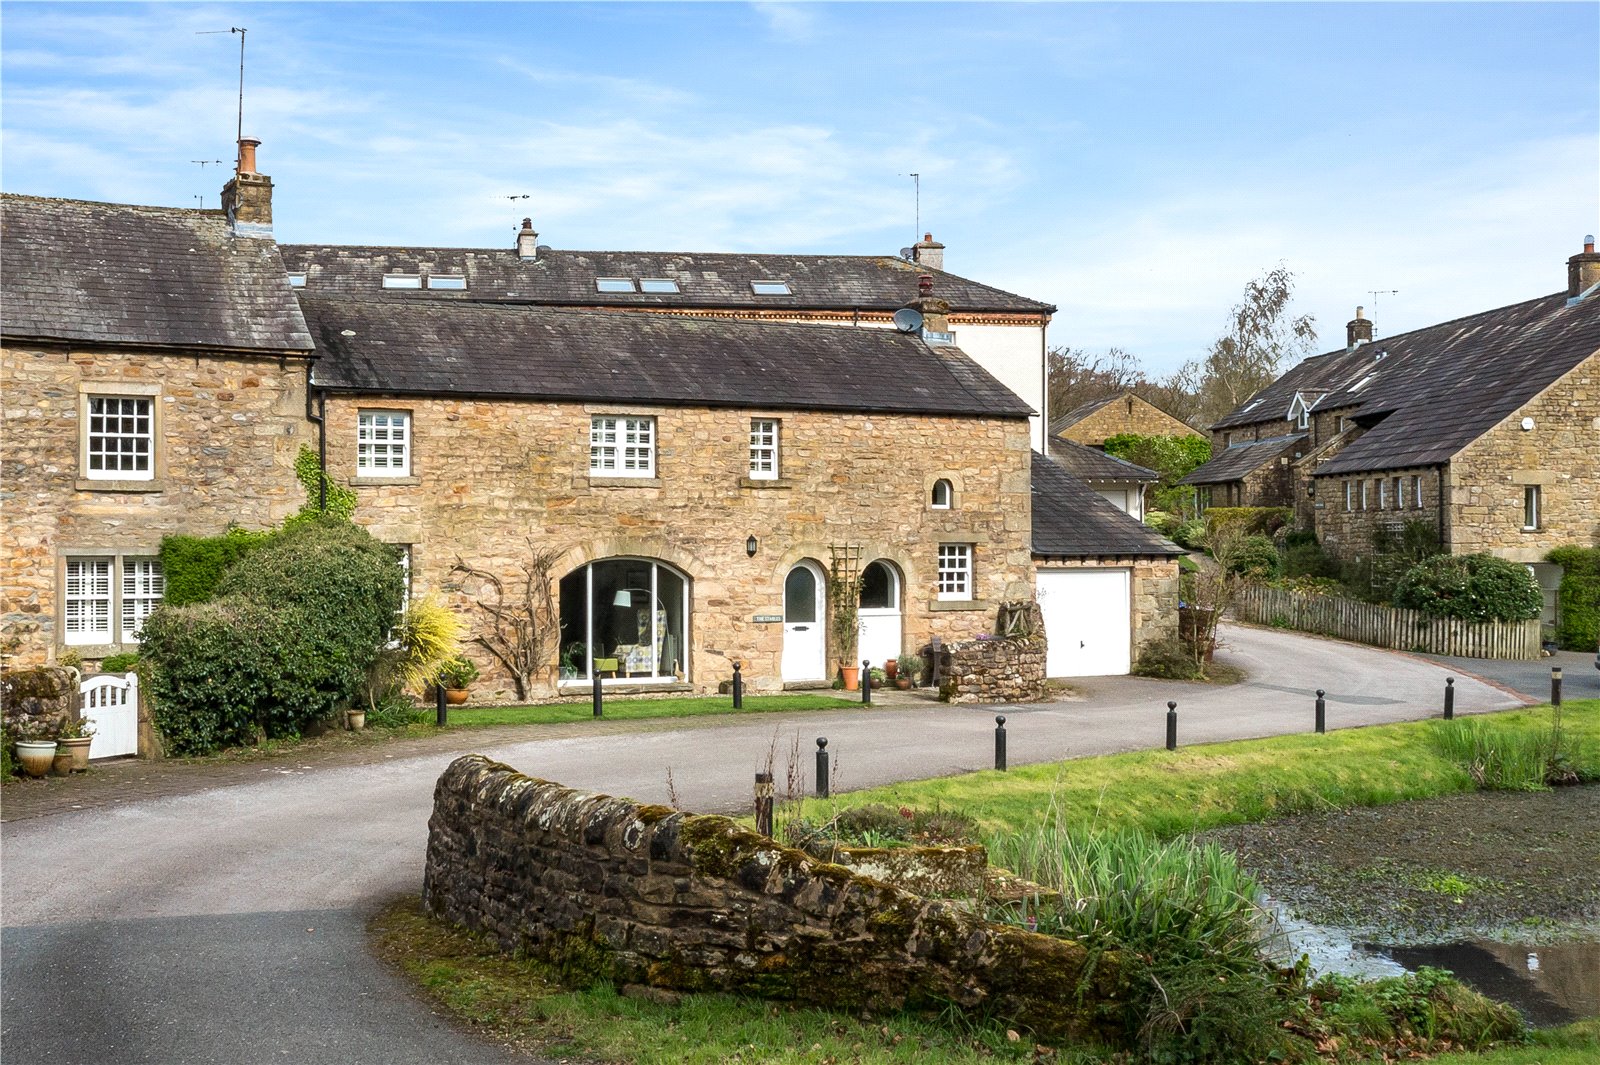 The Stables, Burton in Lonsdale, Carnforth, North Yorkshire